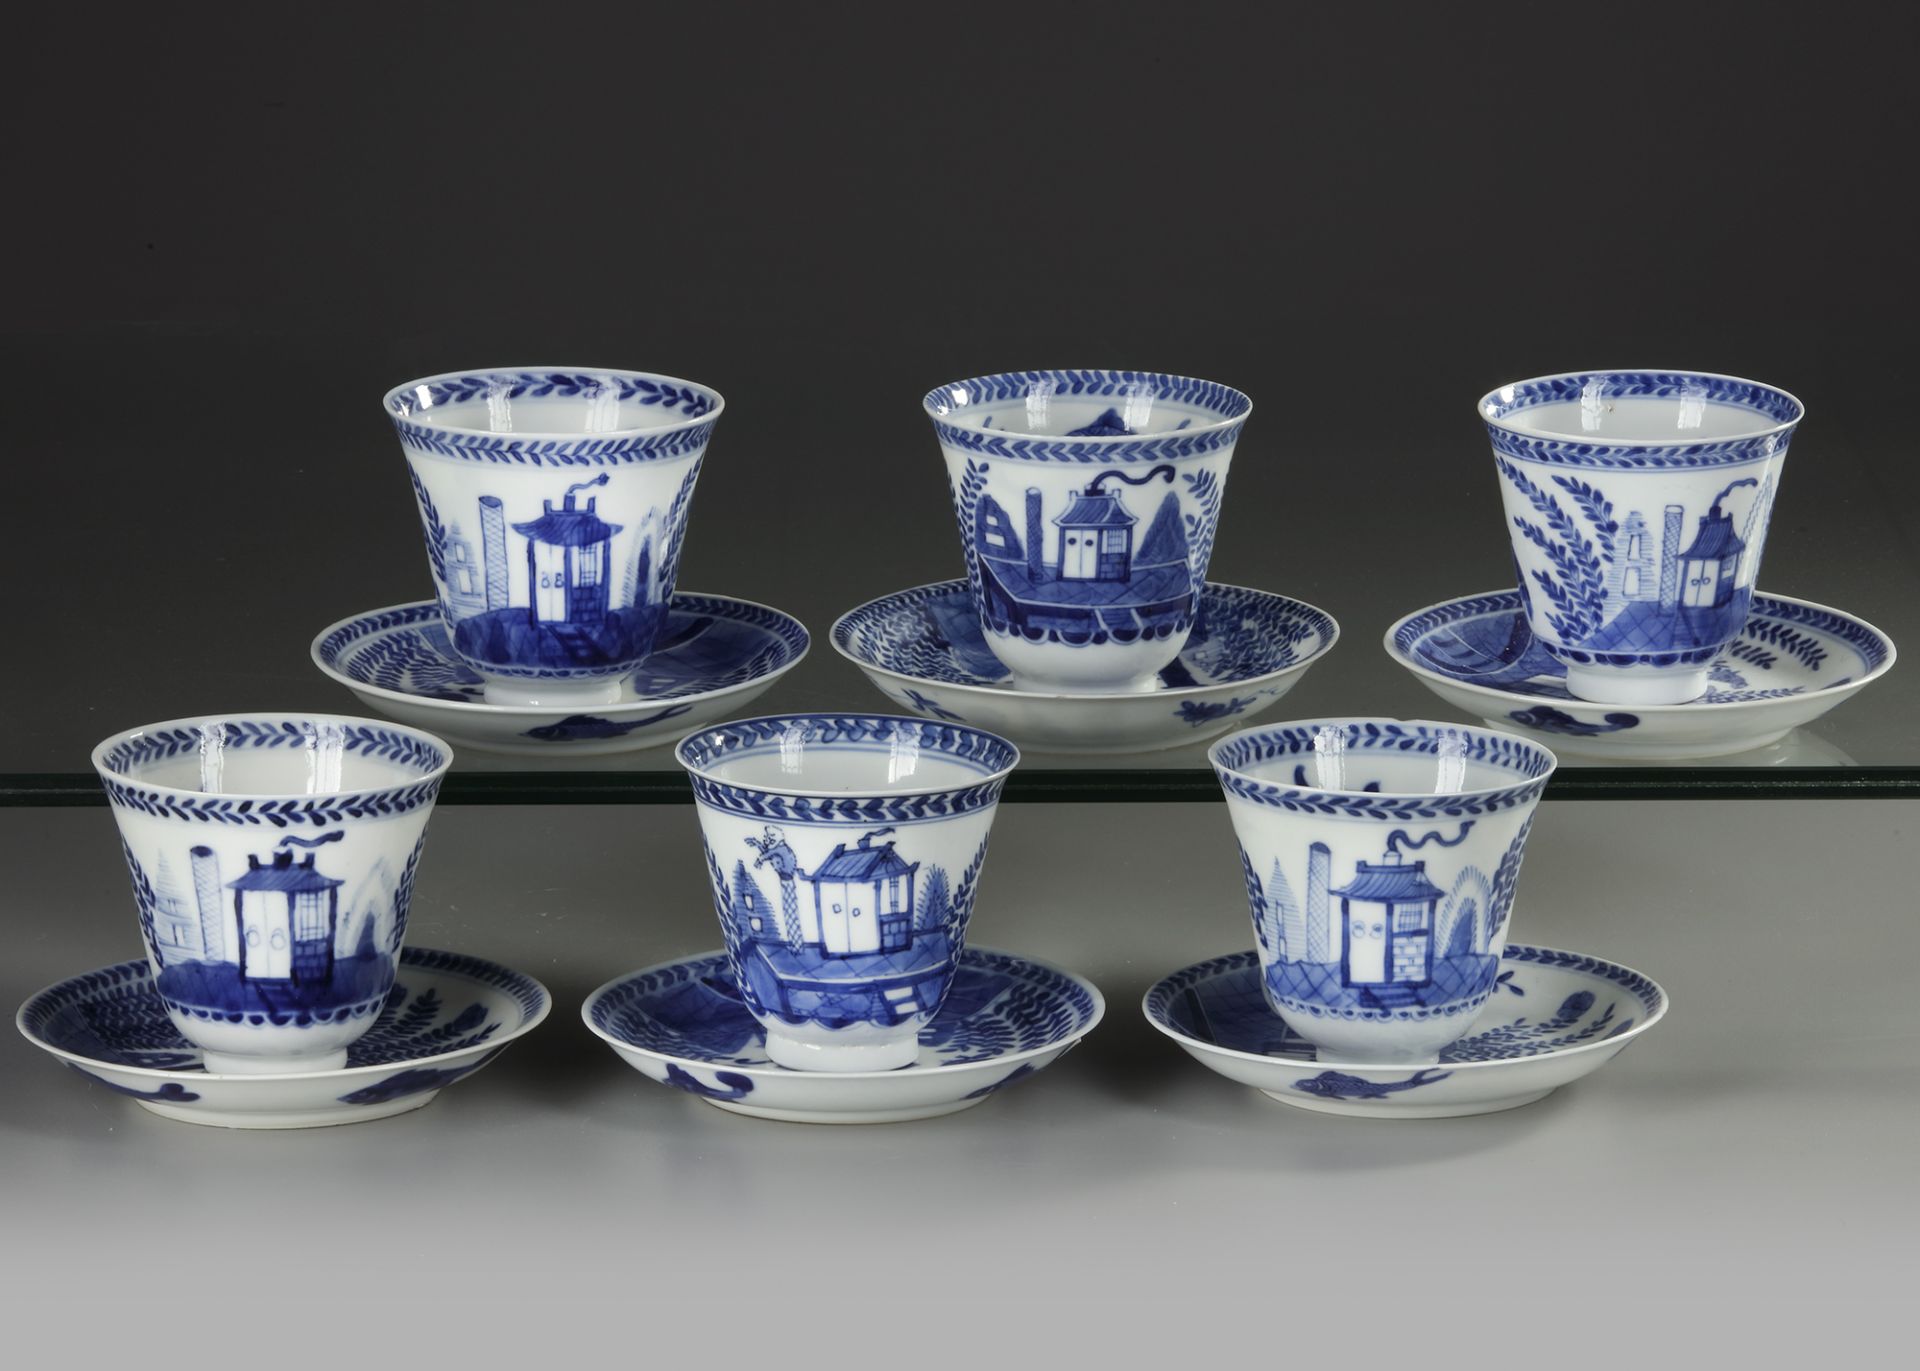 SIX CHINESE BLUE AND WHITE 'CUCKOO IN THE HOUSE' CUPS AND SACUERS, 18TH CENTURY